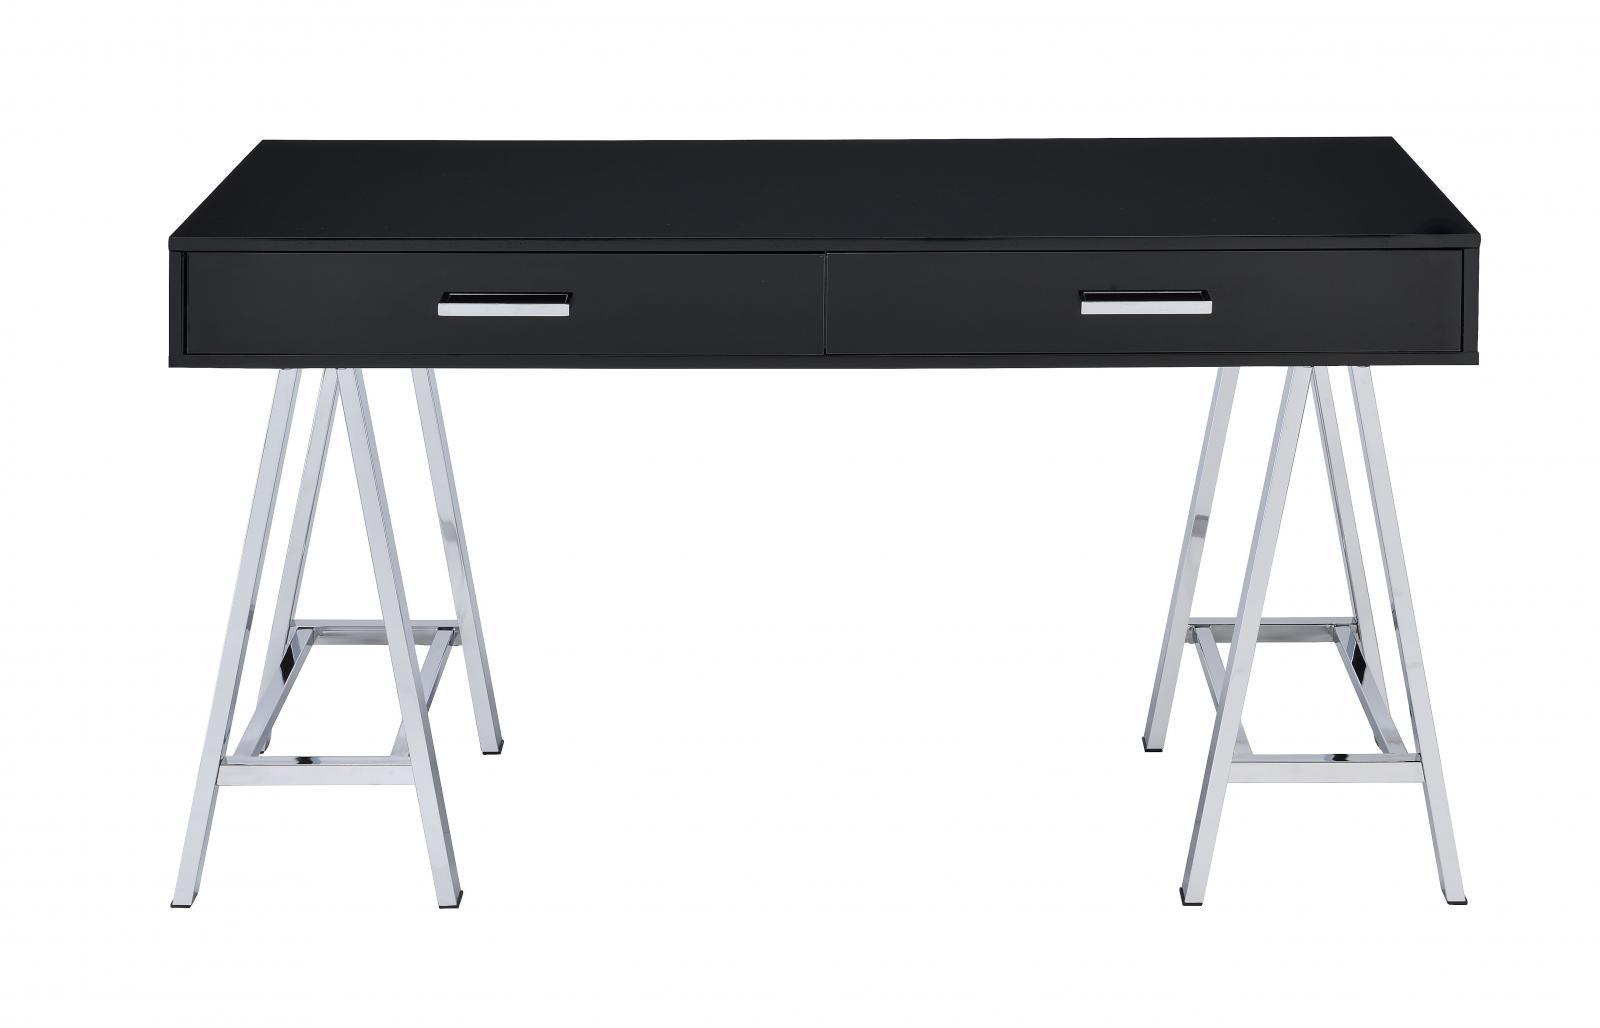 

    
Contemporary Black High Gloss & Chrome Writing WITHOUT USB Desk by Acme 92227-3pcs Coleen
